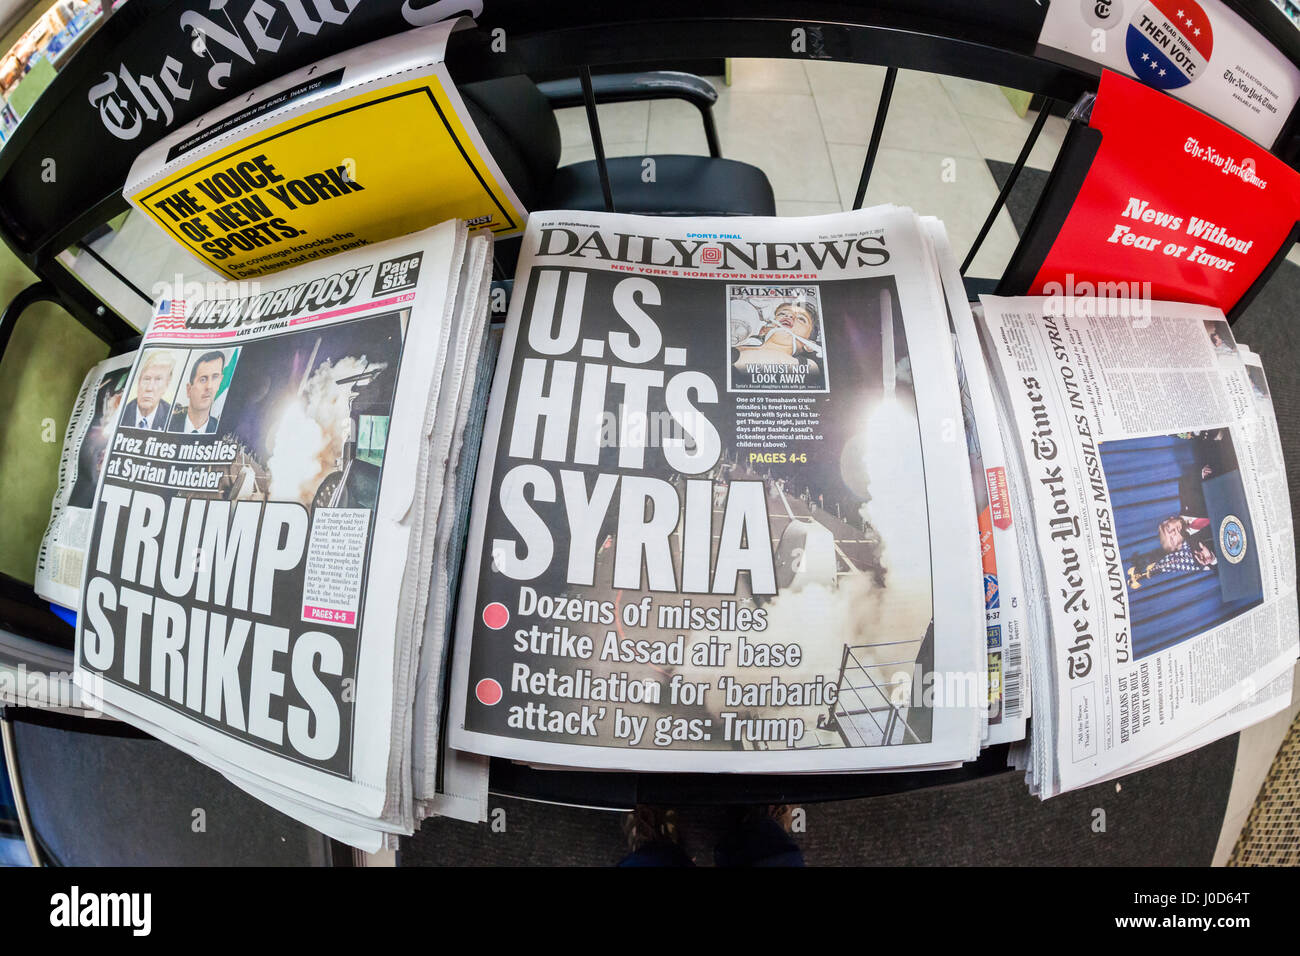 The New York Daily News, the New York Post and other papers report on Friday, April 7, 2017 on the previous evening's bombing of a Syrian air base in retaliation for the Assad government using chemical weapons. (© Richard B. Levine) Stock Photo